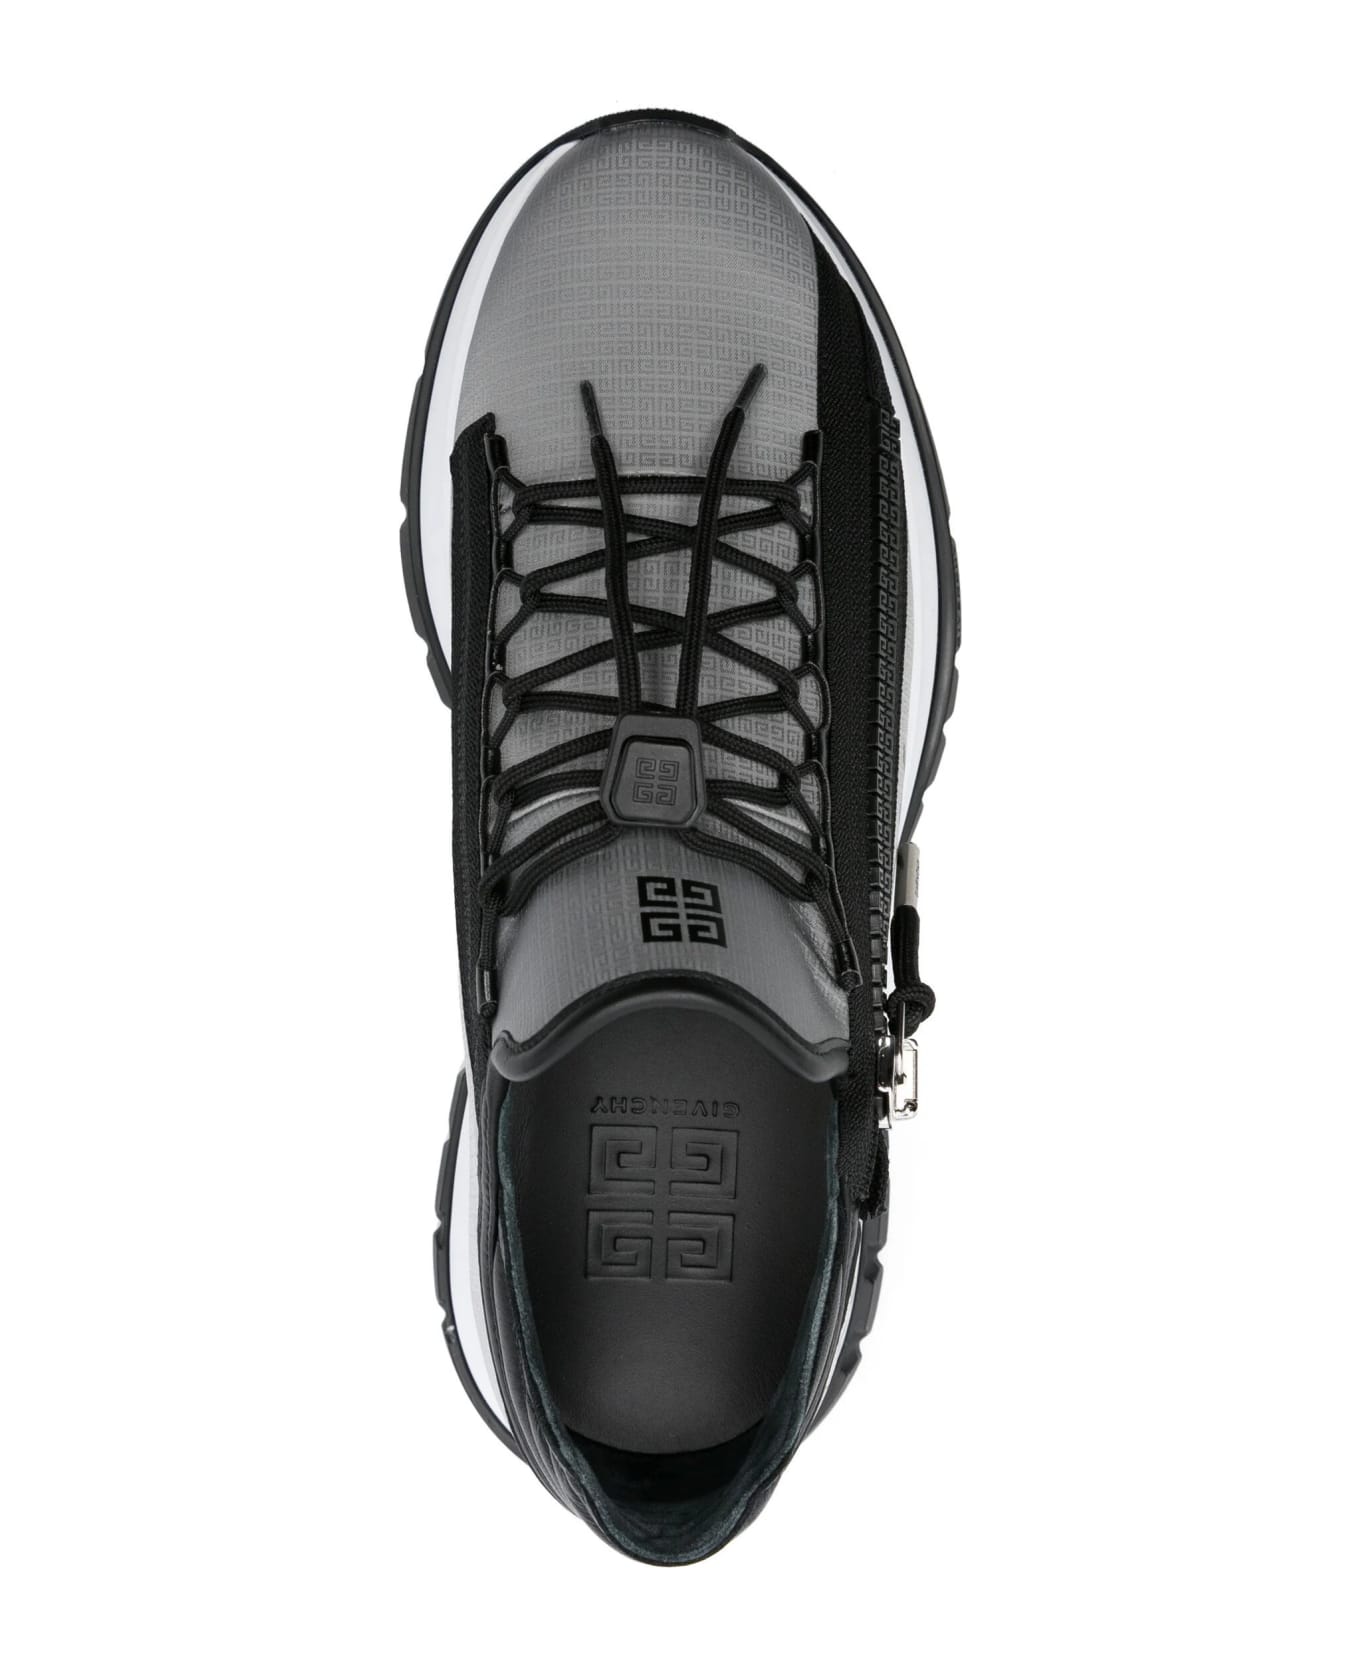 Givenchy Specter Running Sneakers In Black 4g Nylon With Zip - Grey